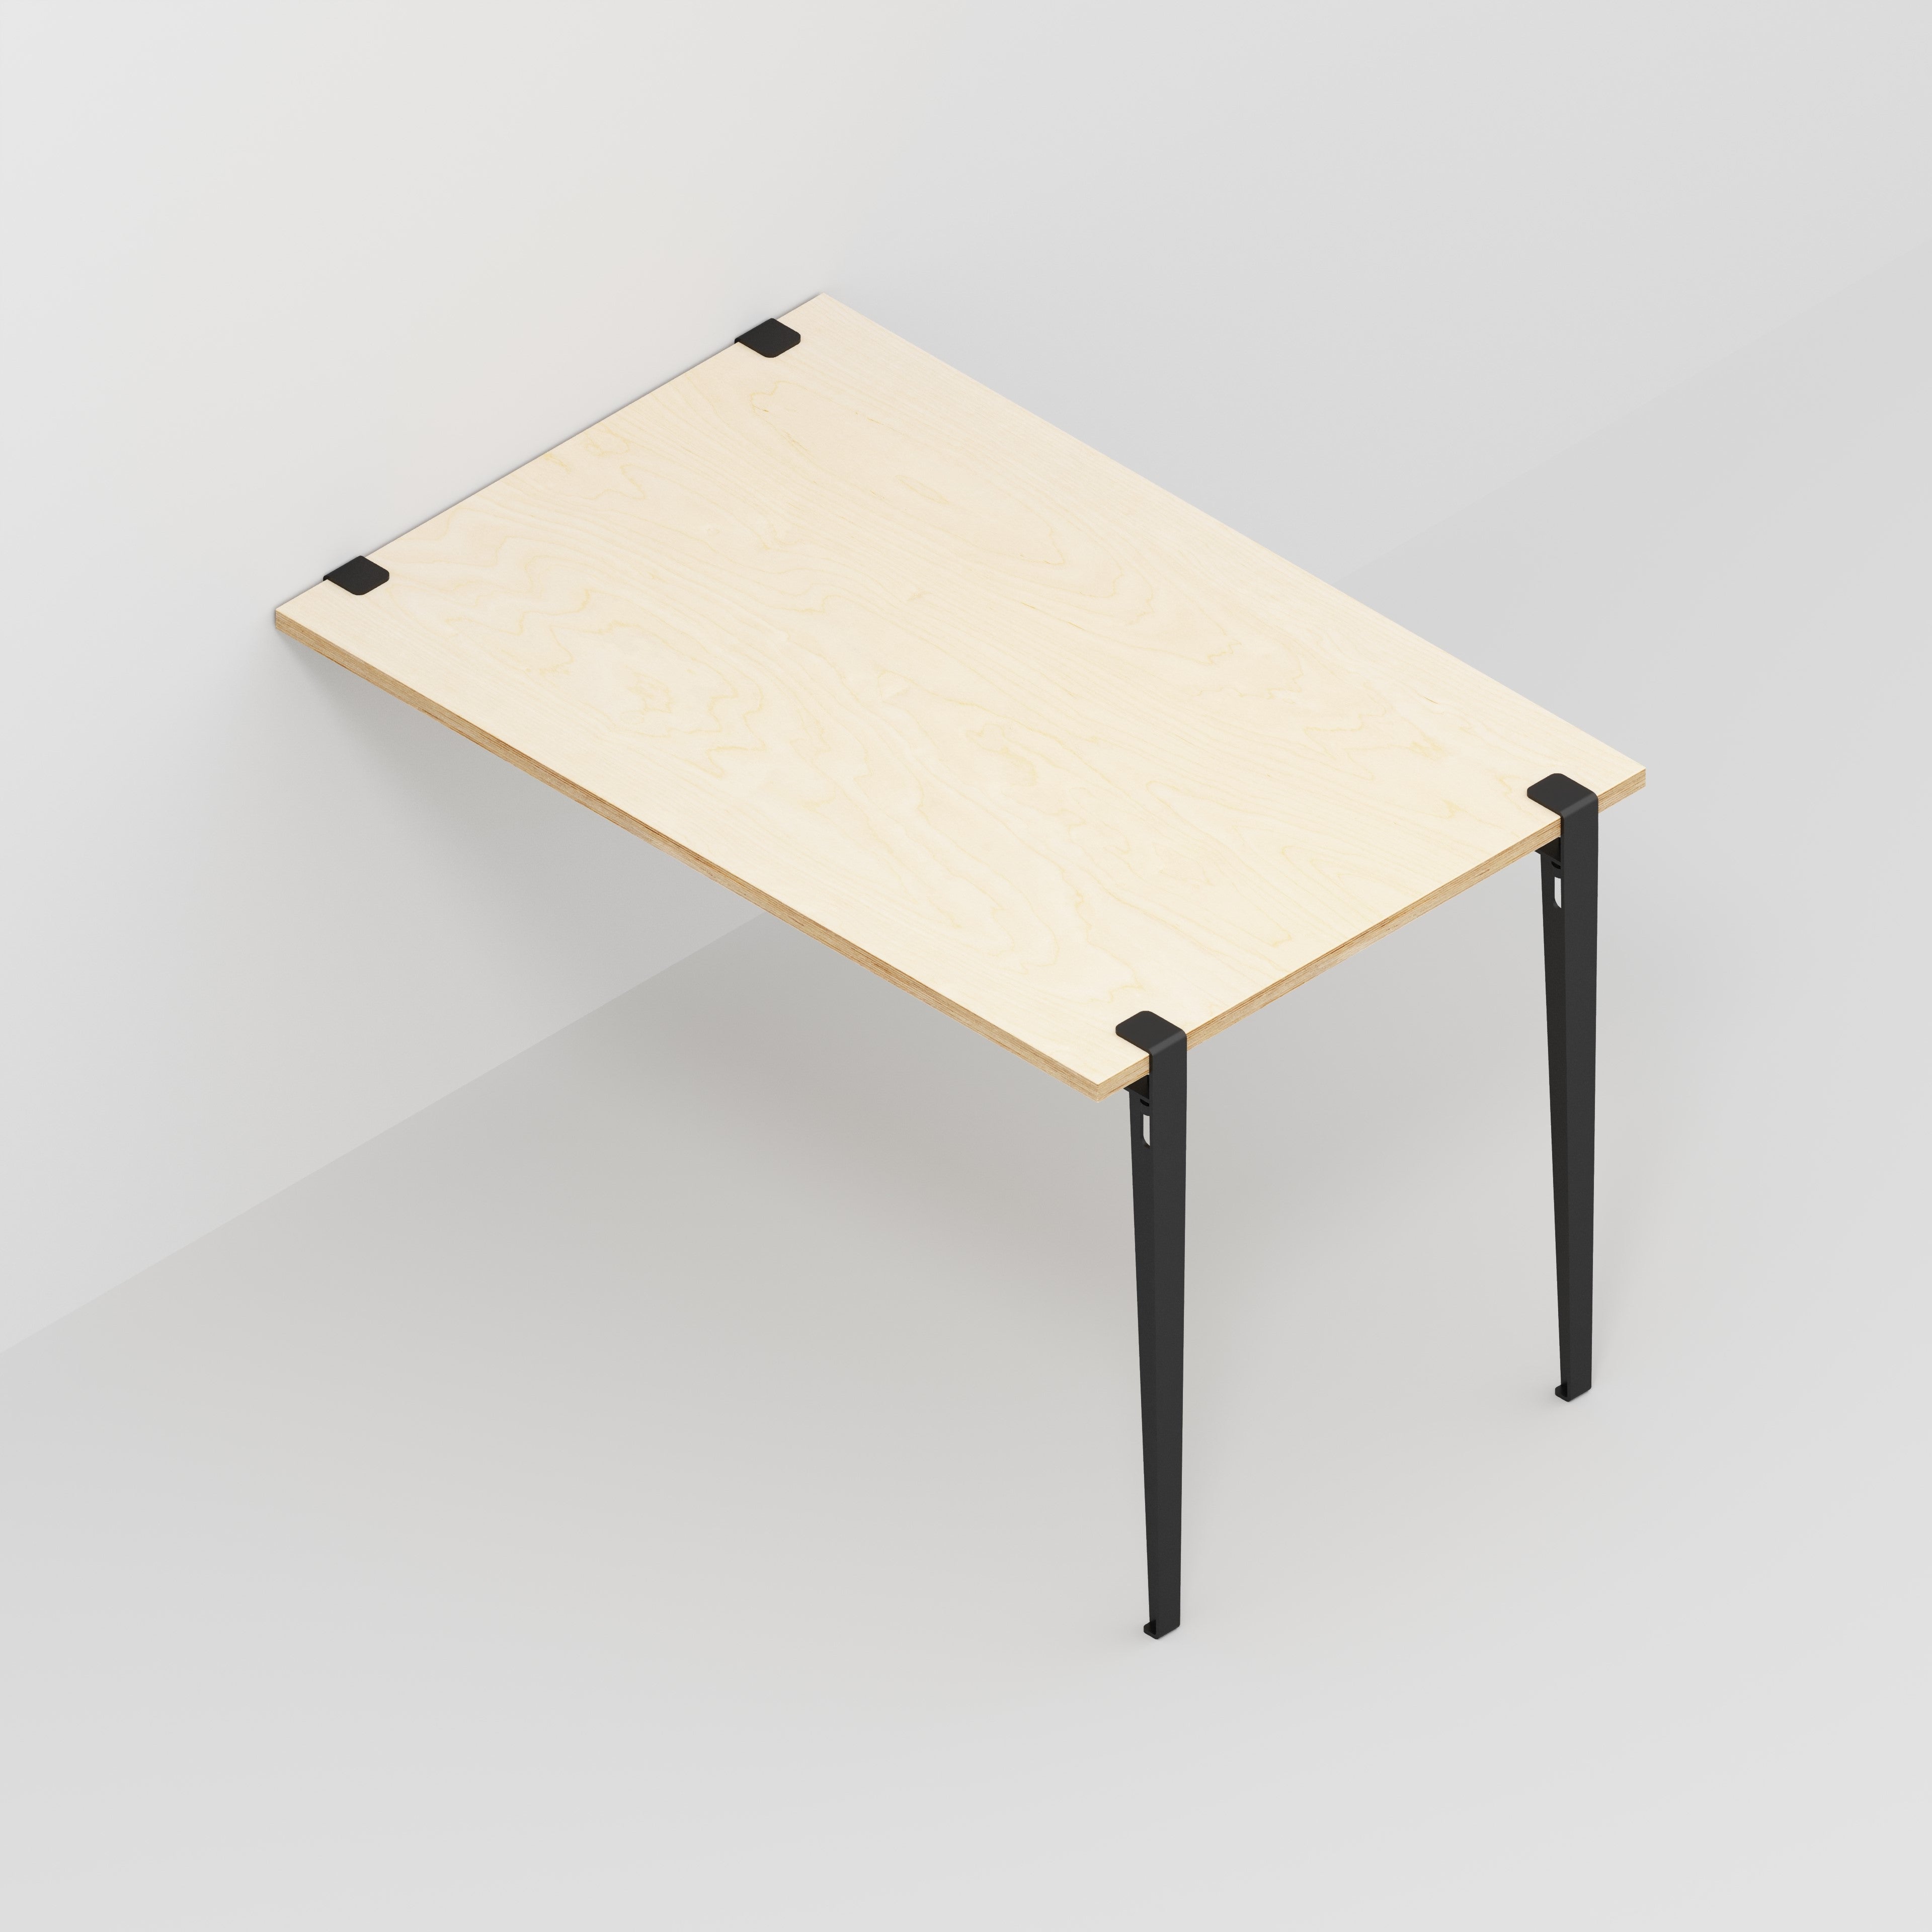 Wall Table with Black Tiptoe Legs and Brackets - Plywood Birch - 1200(w) x 800(d) x 750(h)